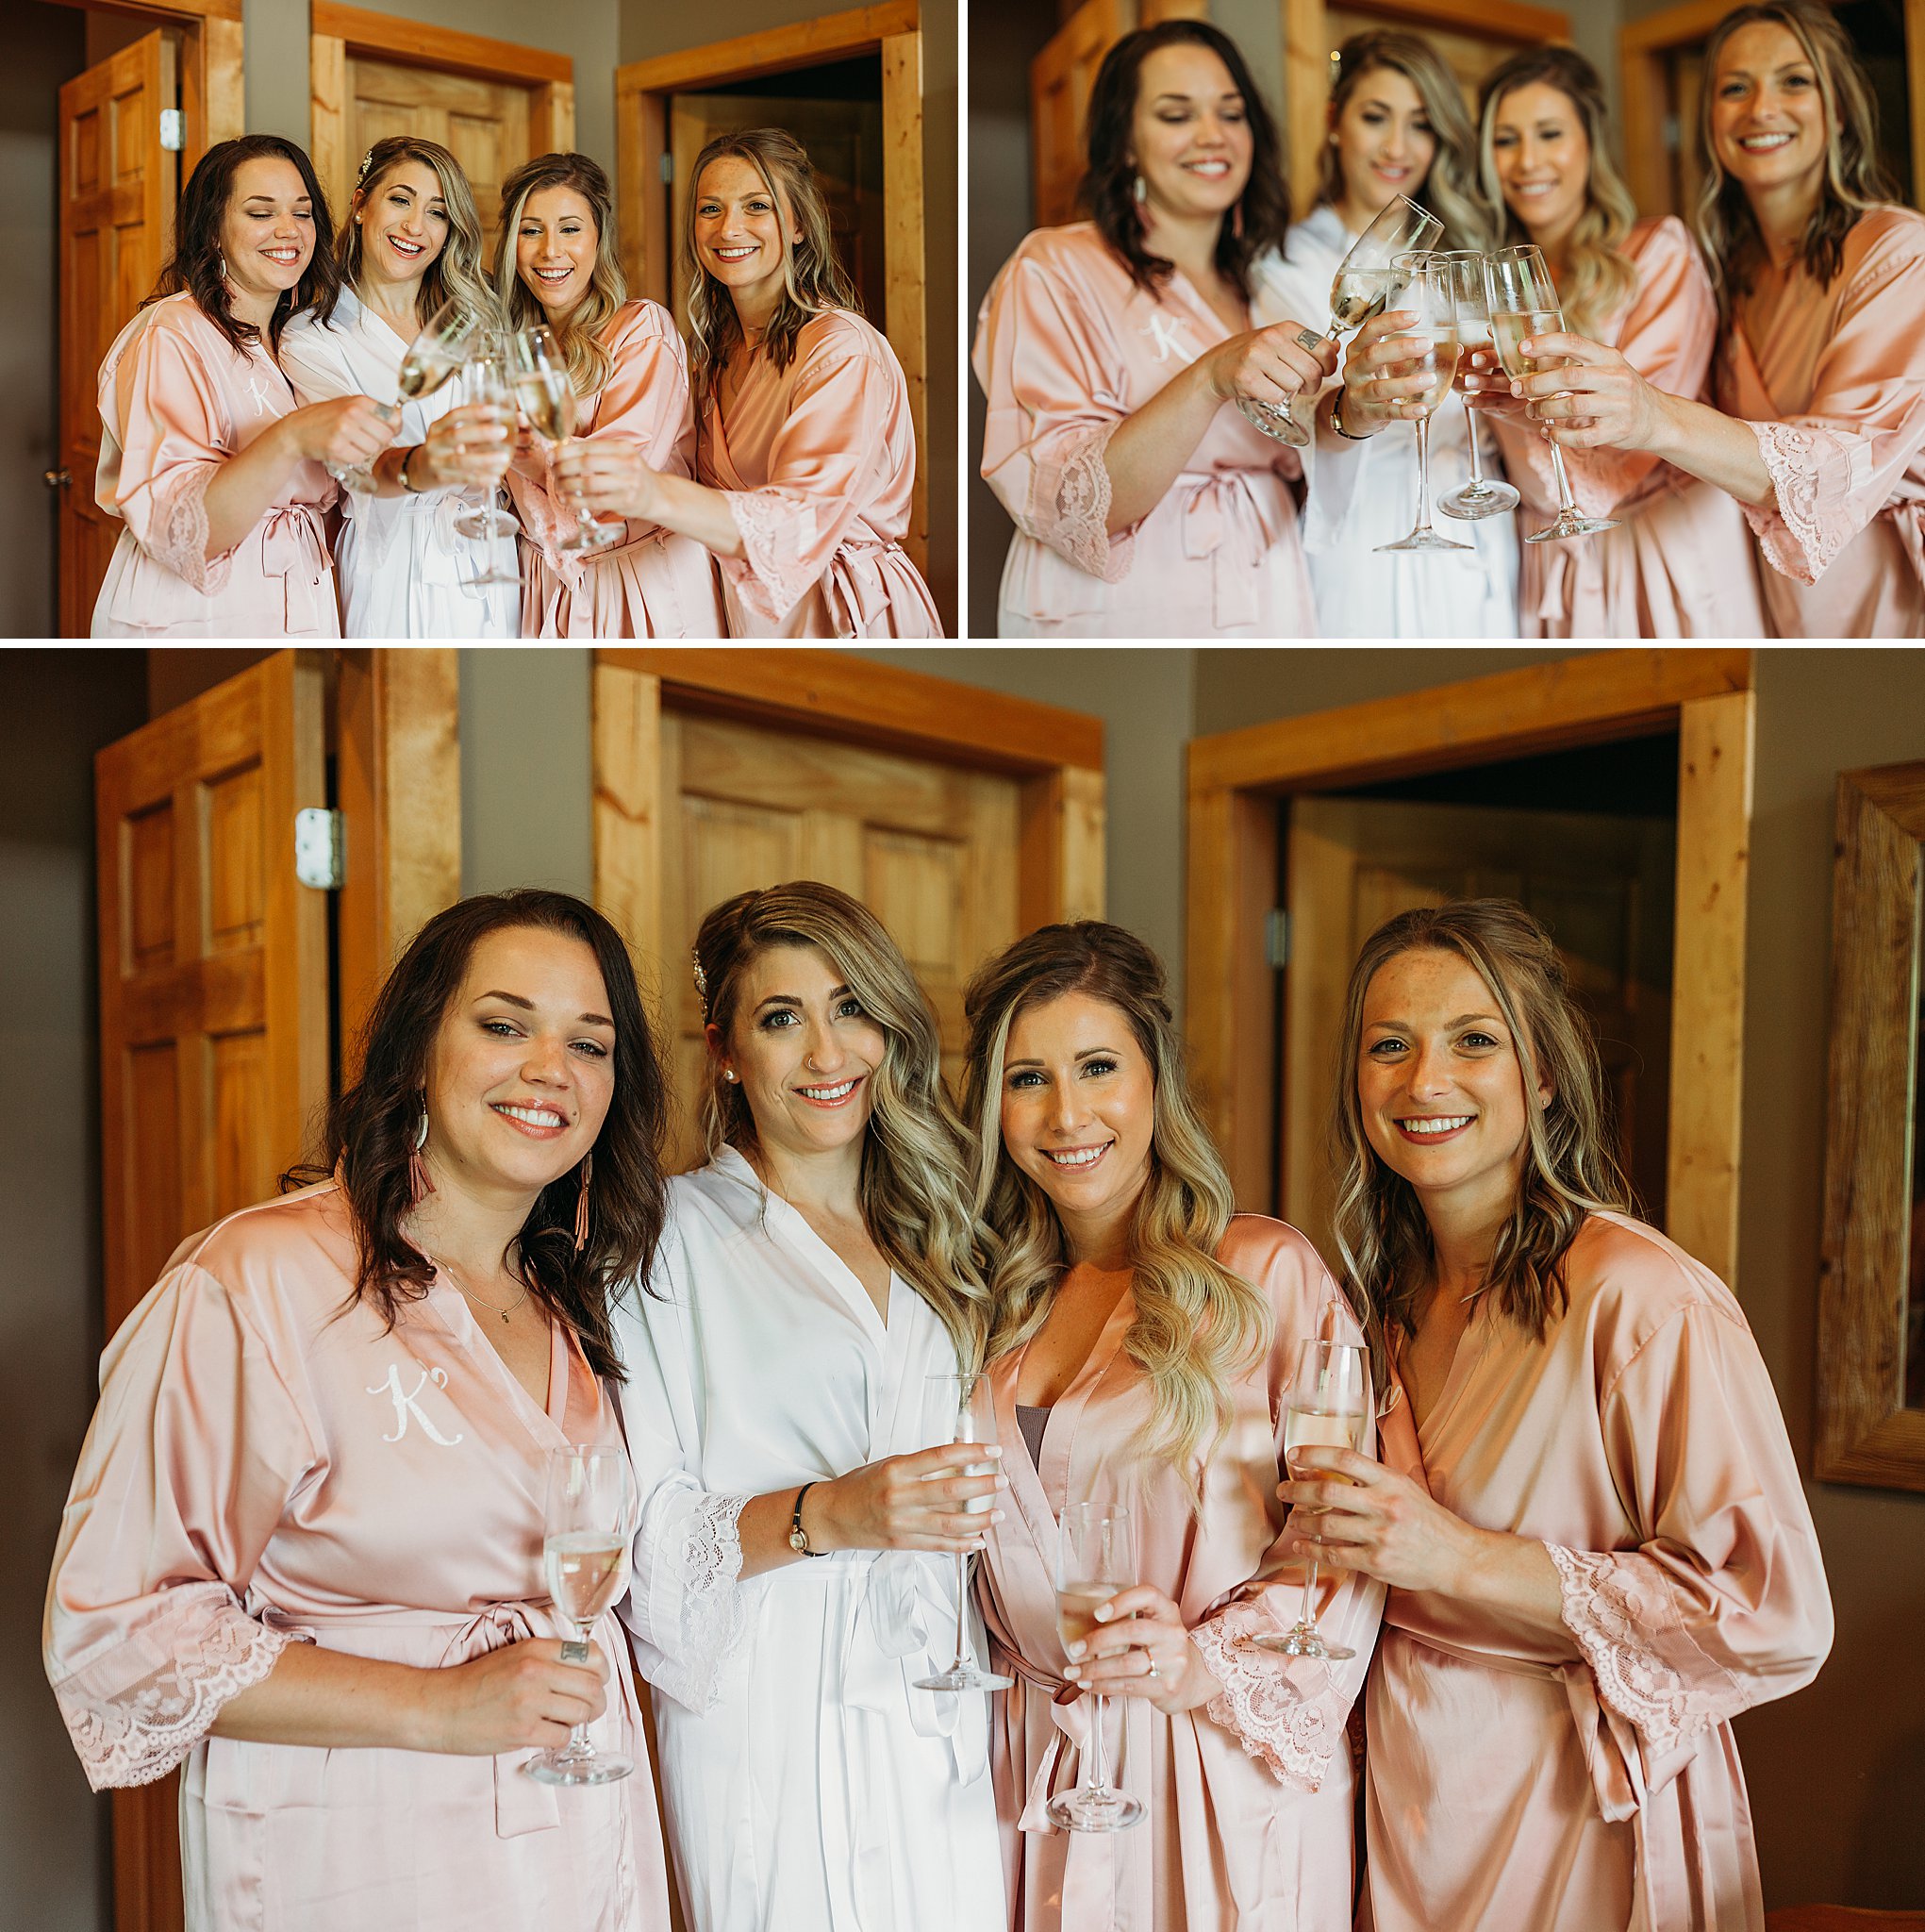 bridesmaids getting ready photos with matching robes and champagne.